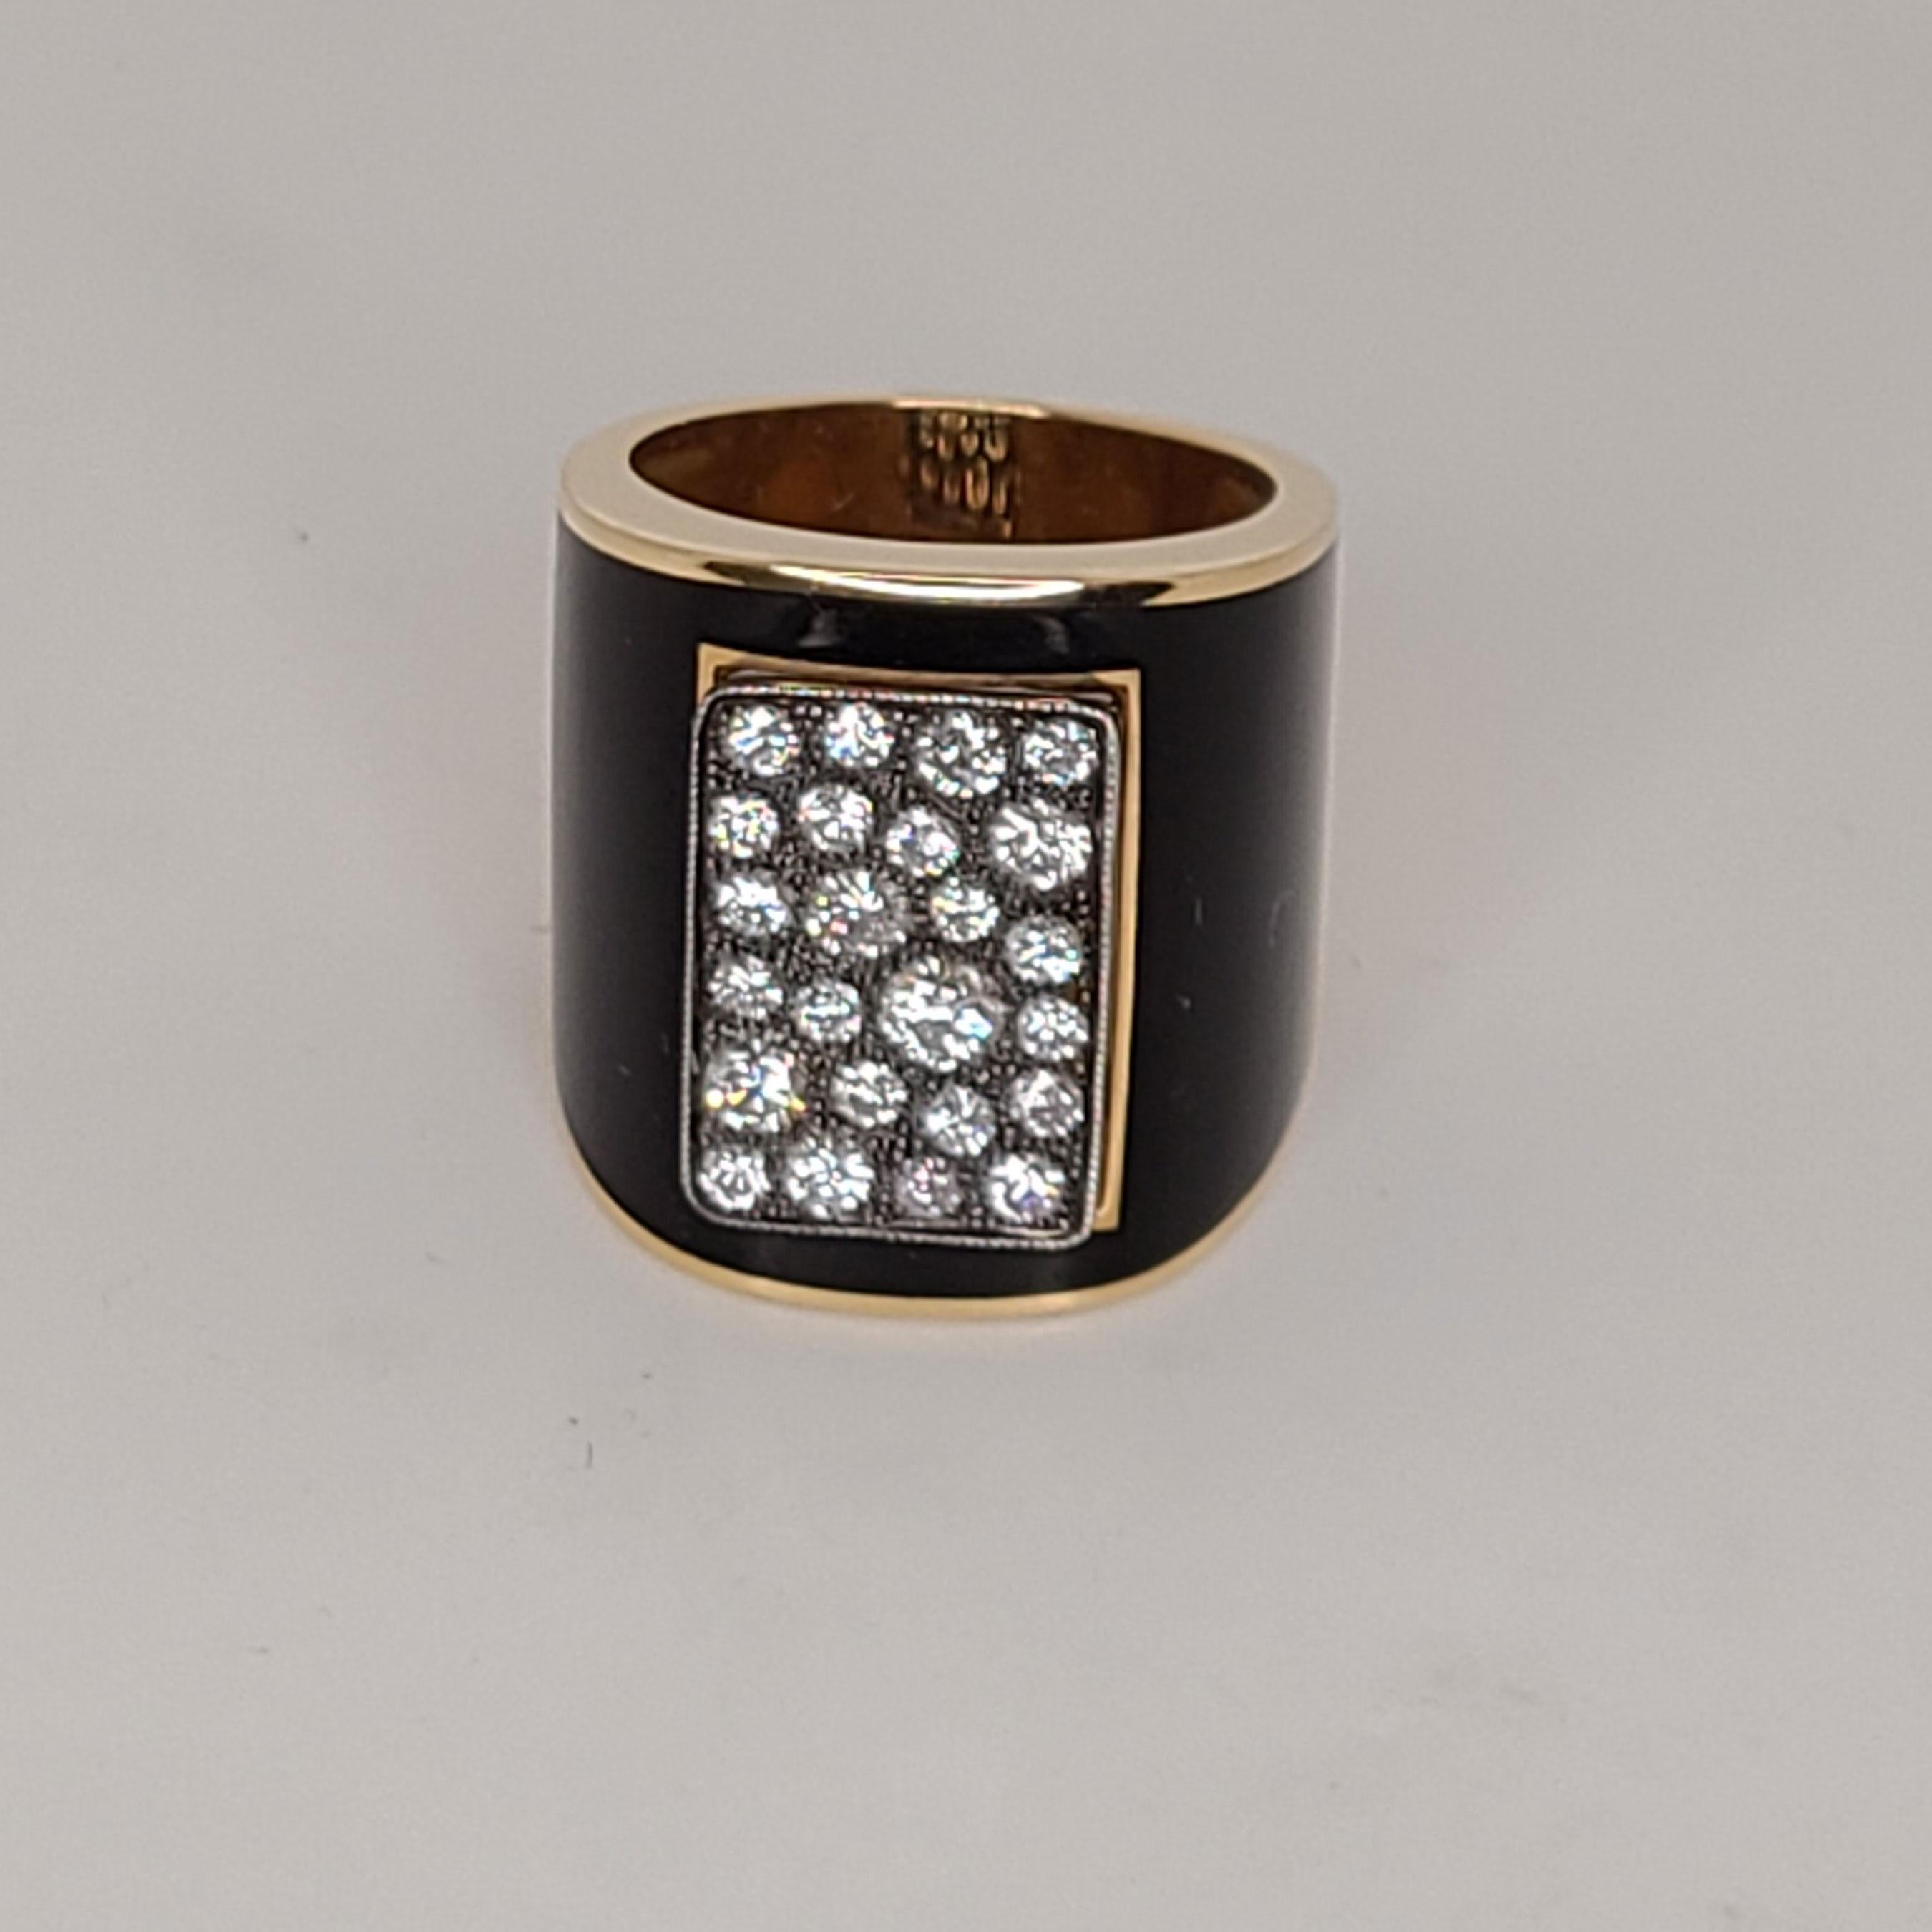 This rare 18K Rose Gold Ring is inlay-ed with black French enameling and has 24 pave-set Diamonds of 0.97cts on top. It has black finish in between the Diamonds to give it a rustic look and an impression of ancient cobble stone feeling on its top